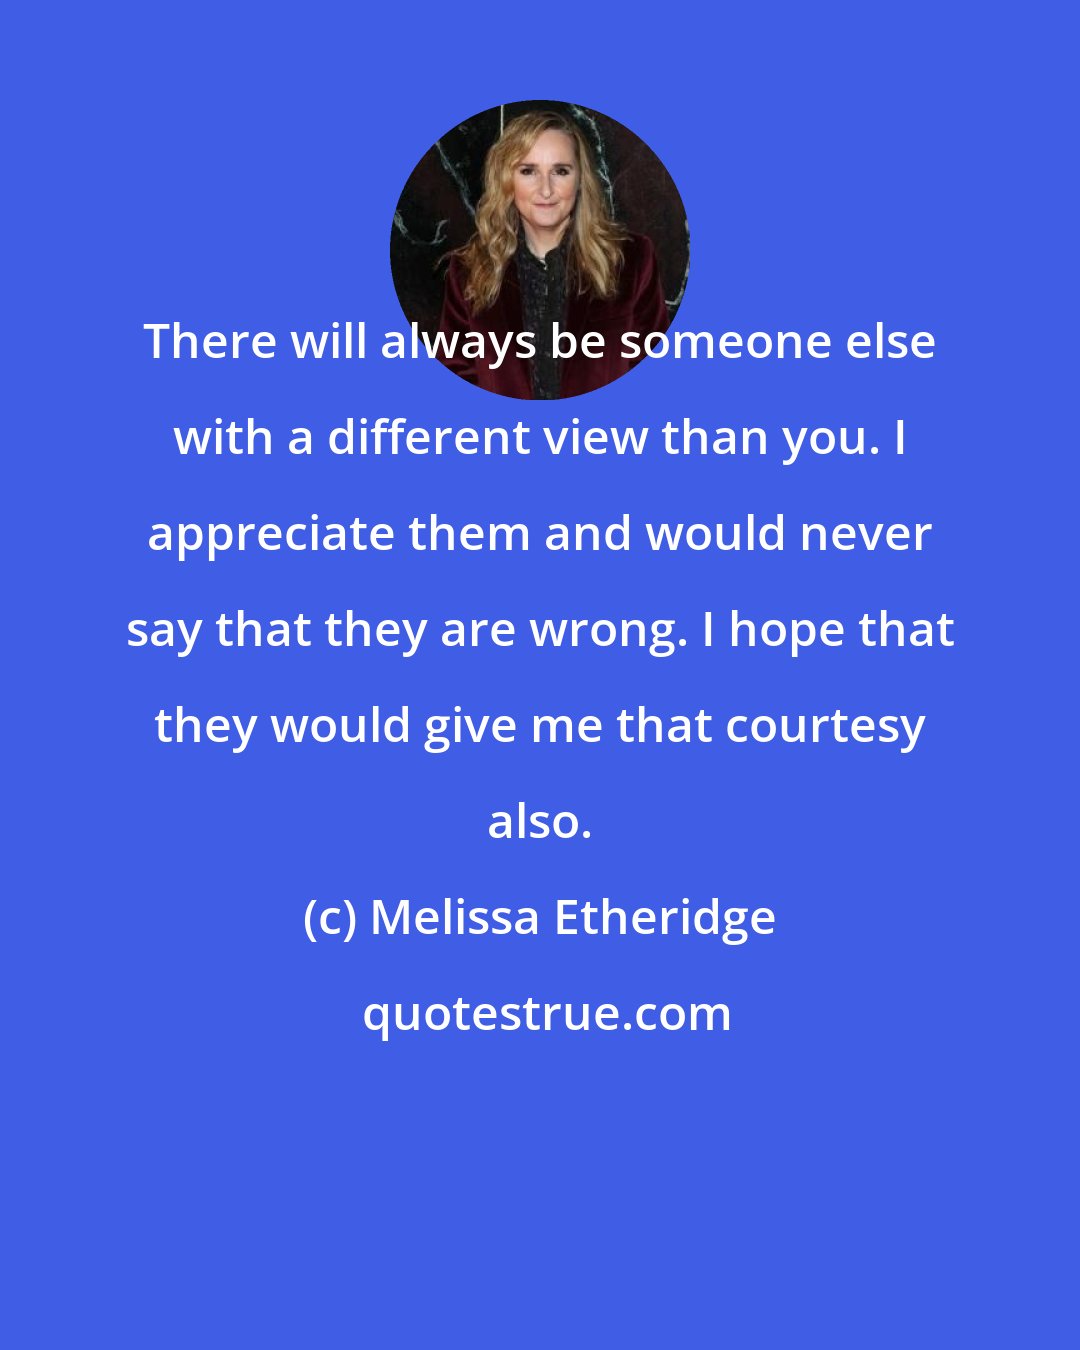 Melissa Etheridge: There will always be someone else with a different view than you. I appreciate them and would never say that they are wrong. I hope that they would give me that courtesy also.